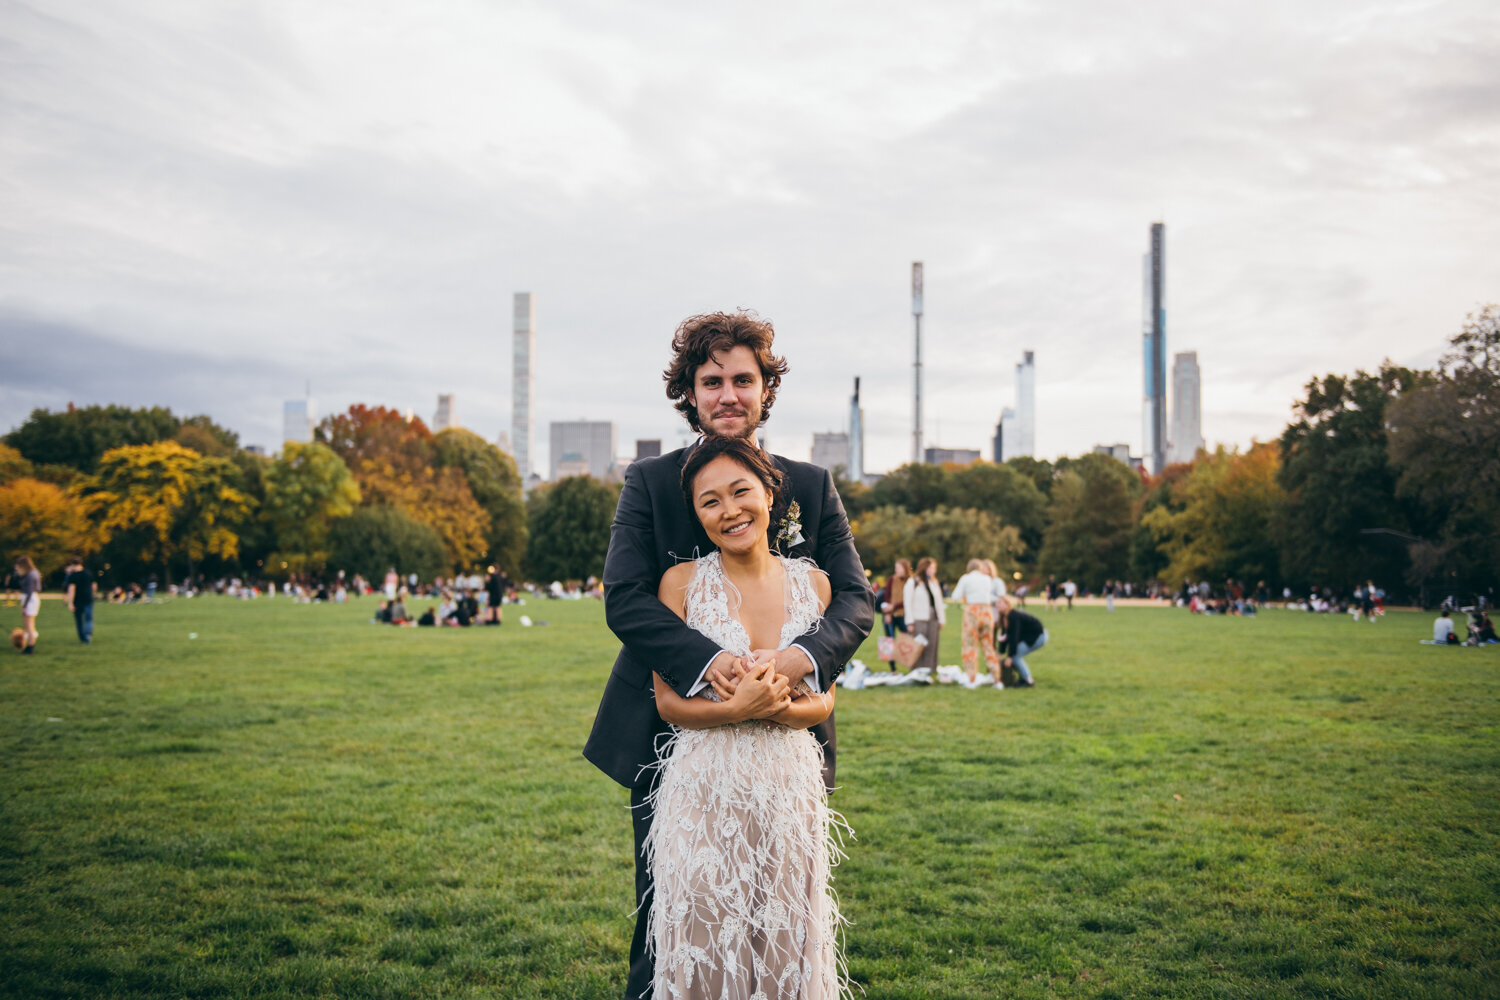 Groom stands behind the bride and has his arms around her. They both smile at the camera. They are standing on the grass in Central Park and park goers, trees, and Manhattan buildings are visible in the background.

Central Park Wedding Photography. Williamsburg Bridge Bridal Portraits. Luxury NYC Wedding Photographer. Manhattan Micro Wedding.